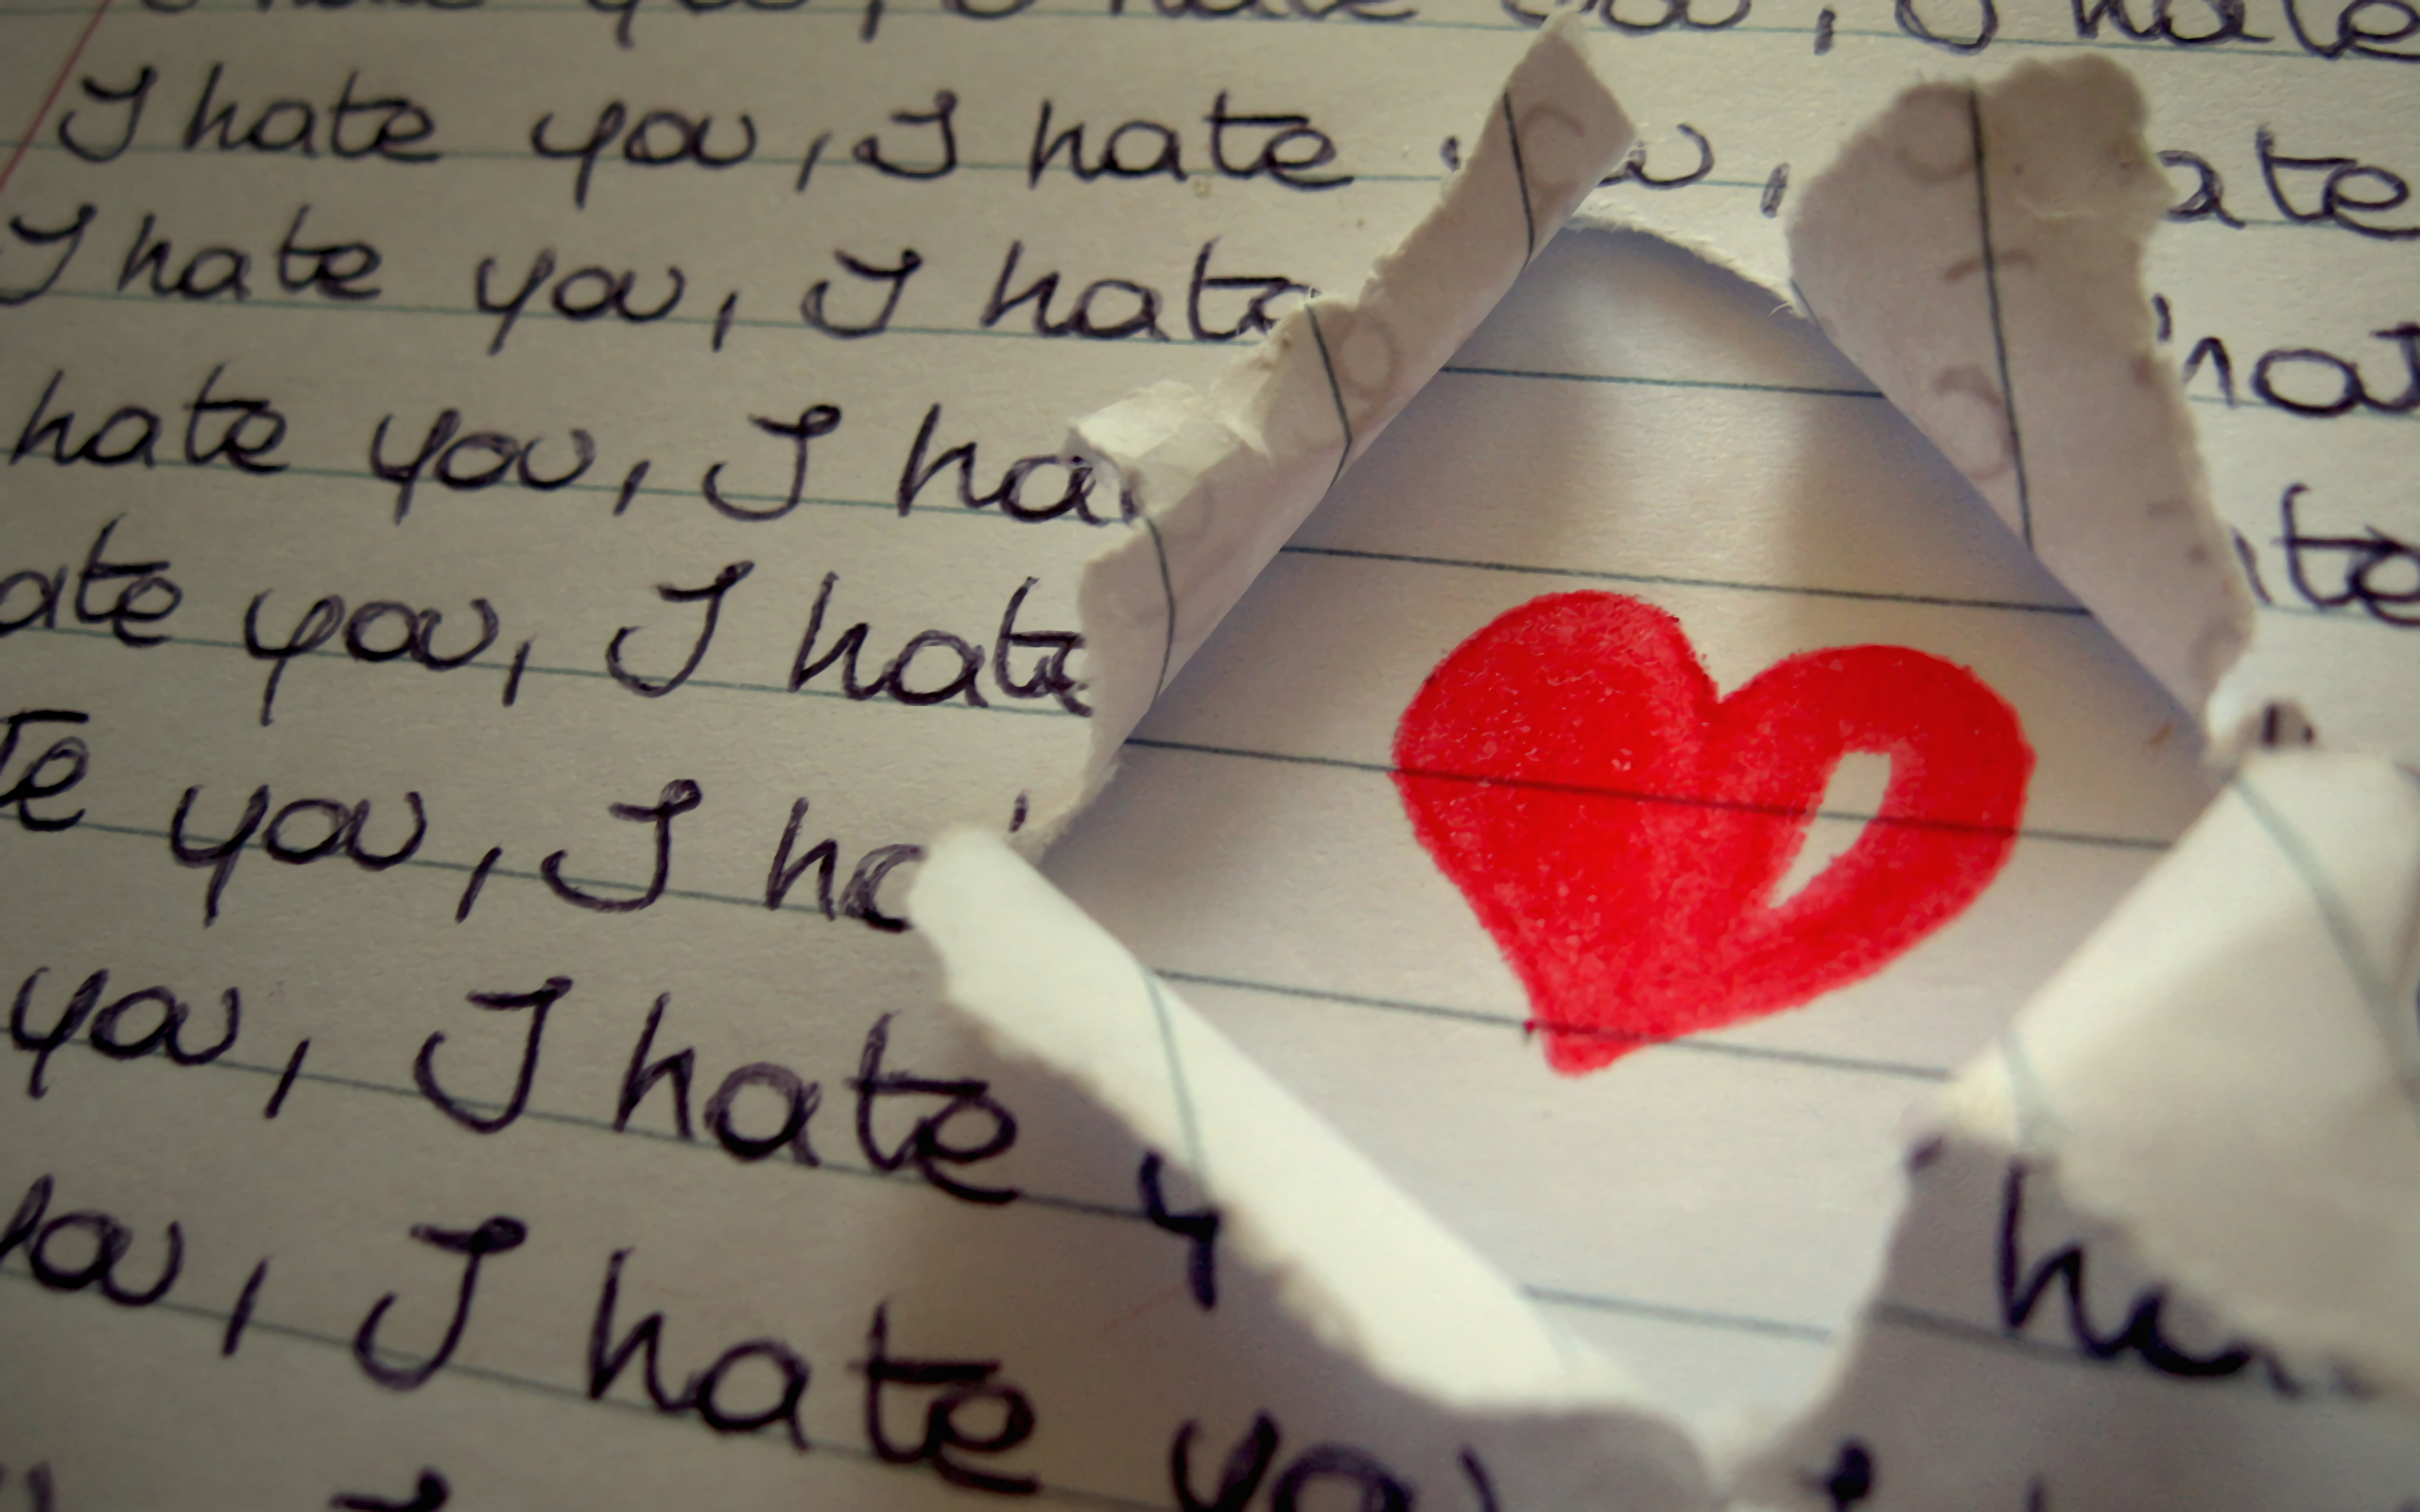 Red heart pierced by a nail on a crumpled paper background, symbolizing The heart under hate message.